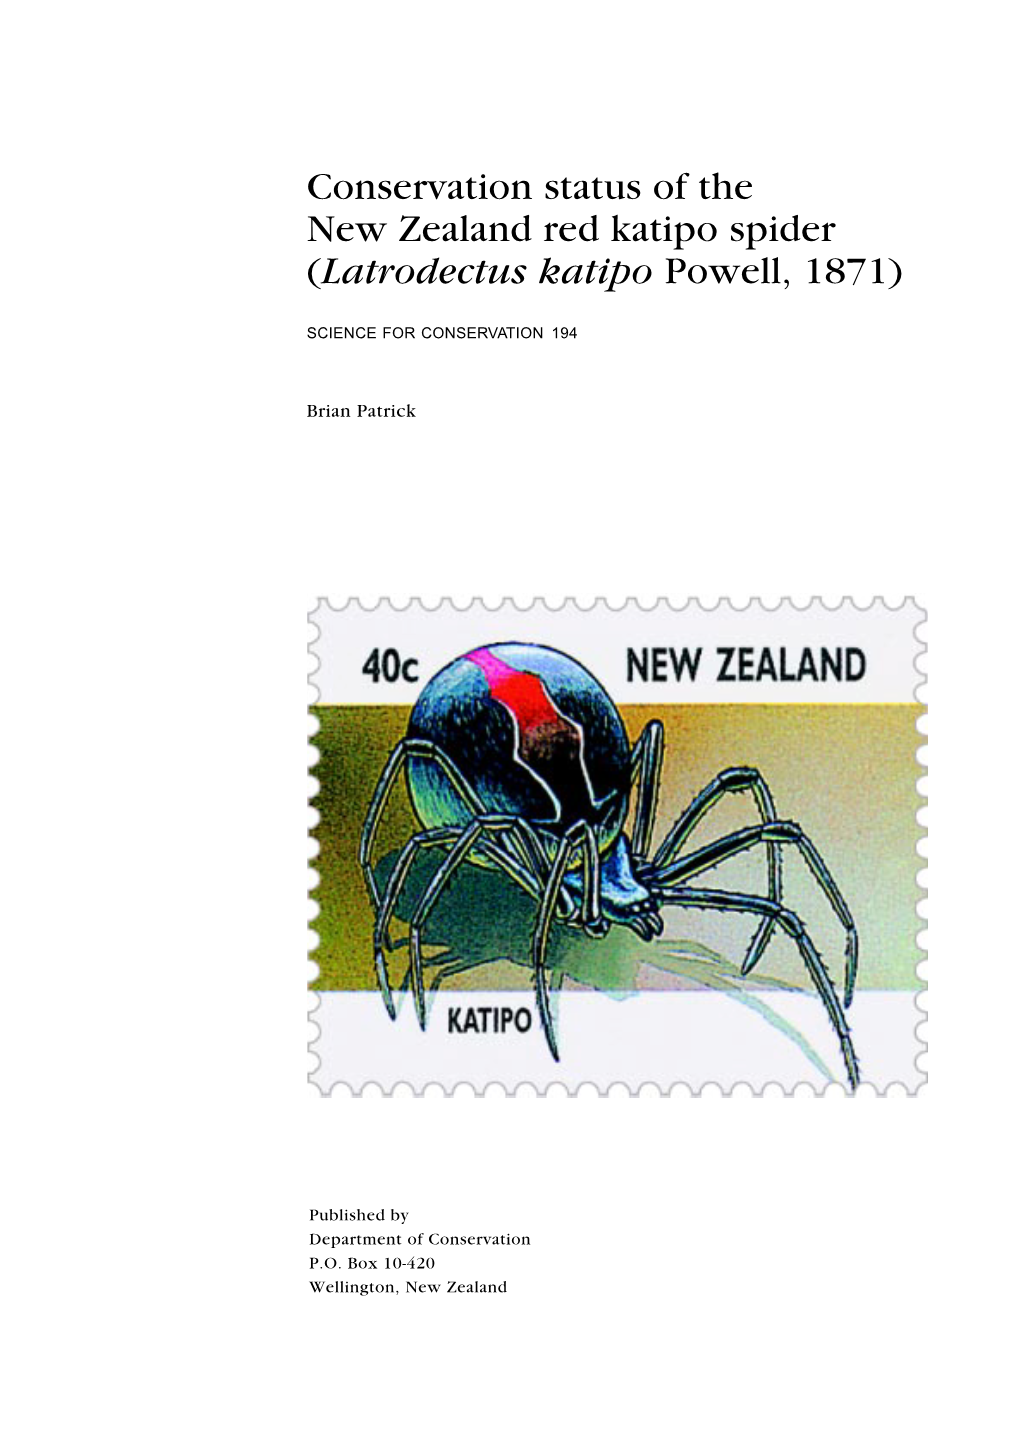 Conservation Status of the New Zealand Red Katipo Spider (Latrodectus Katipo Powell, 1871)